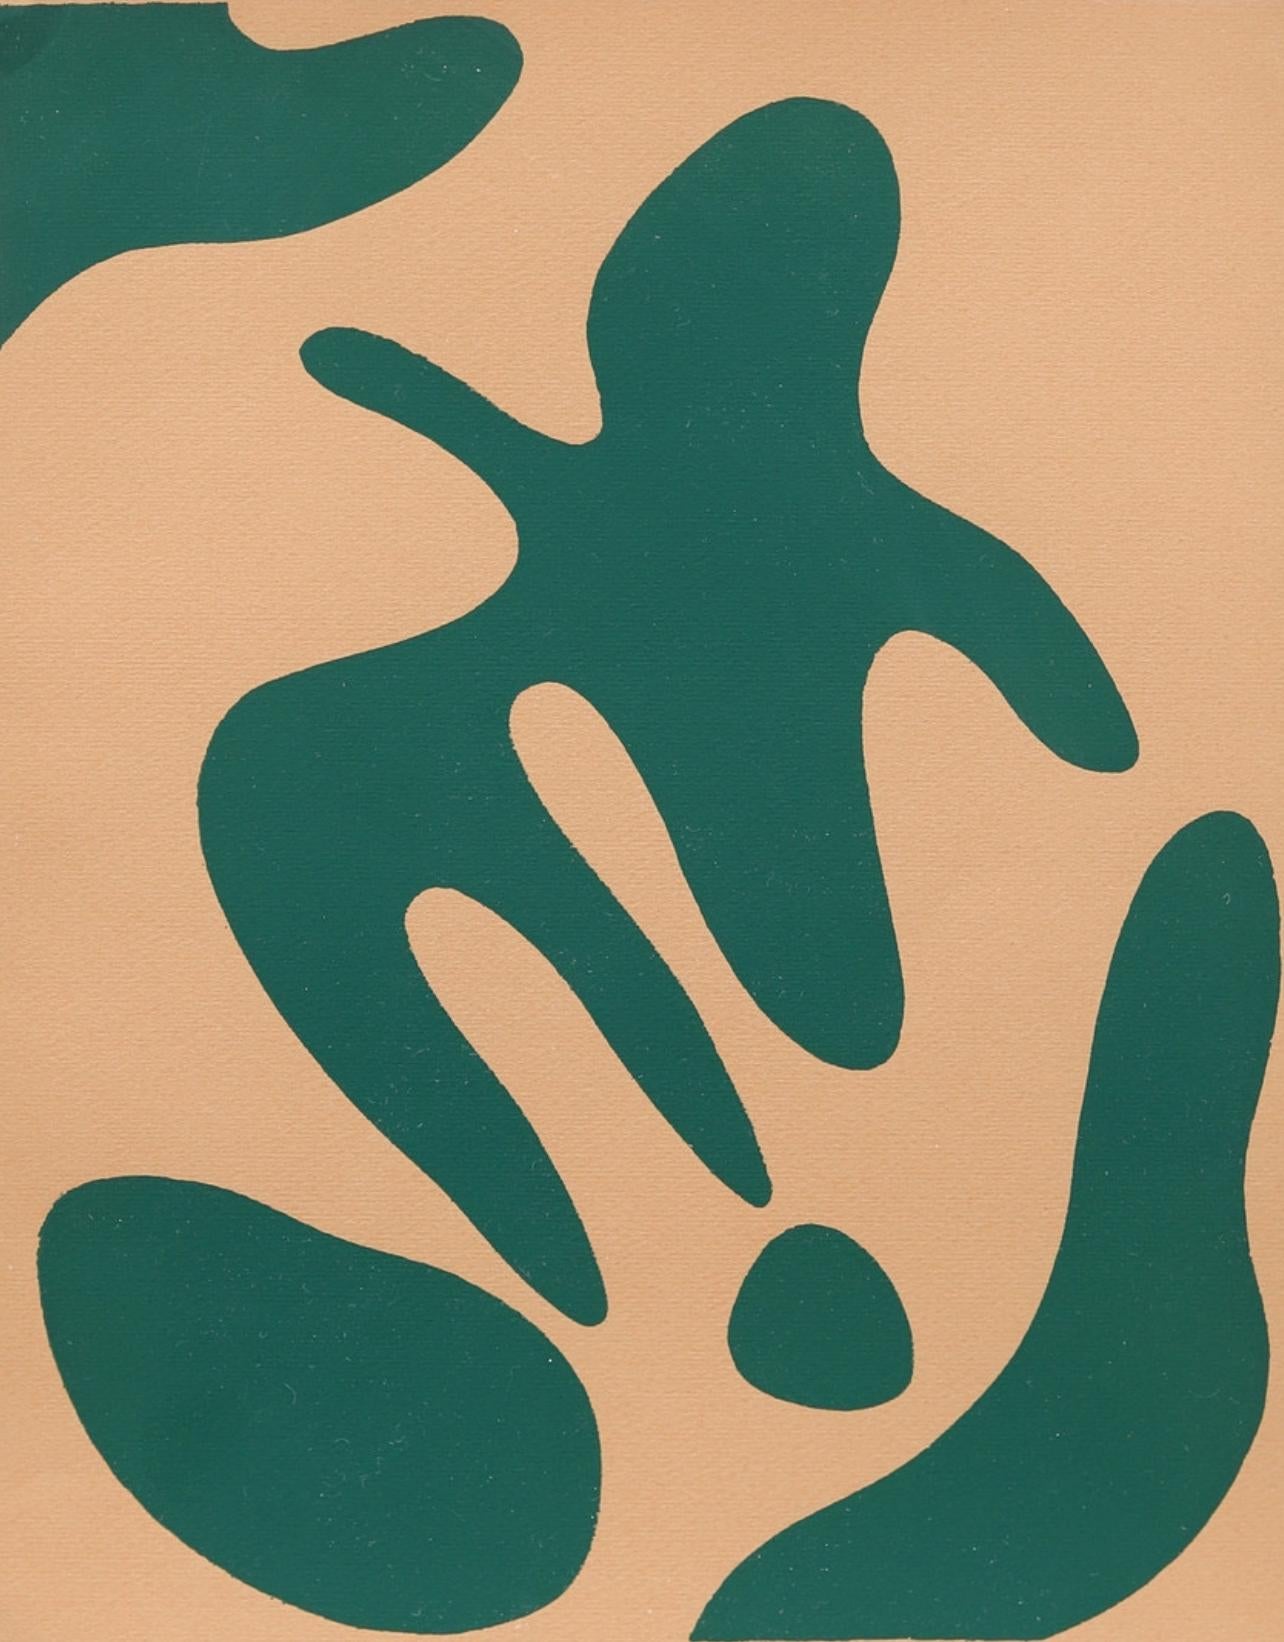 Jean Arp Abstract Print - Arp, Constellation, XXe Siècle (after)